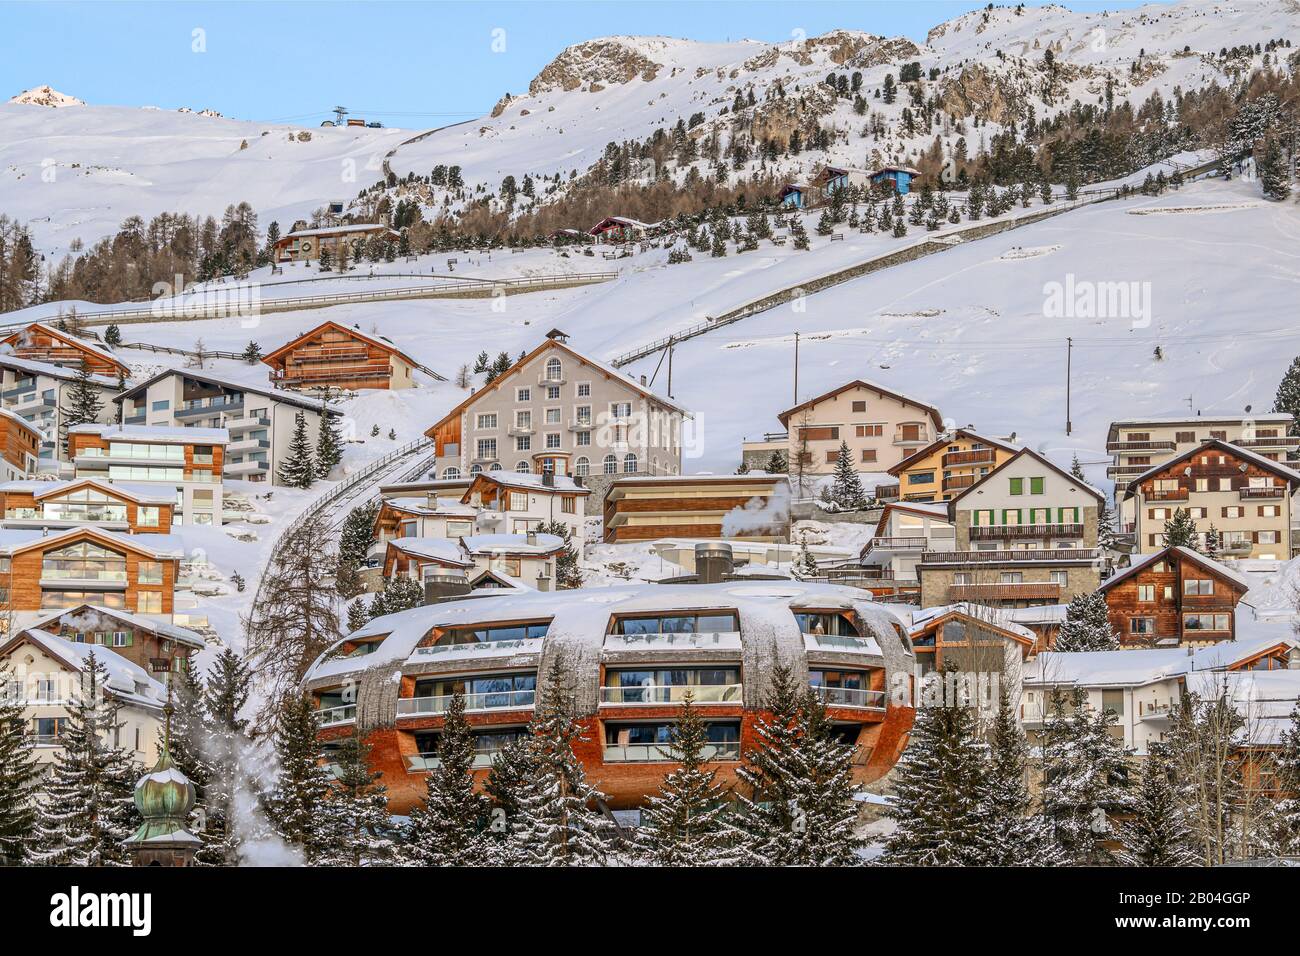 Chesa Futura, built by the famous British architect Lord Norman Foster, St.Moritz, Switzerland Stock Photo